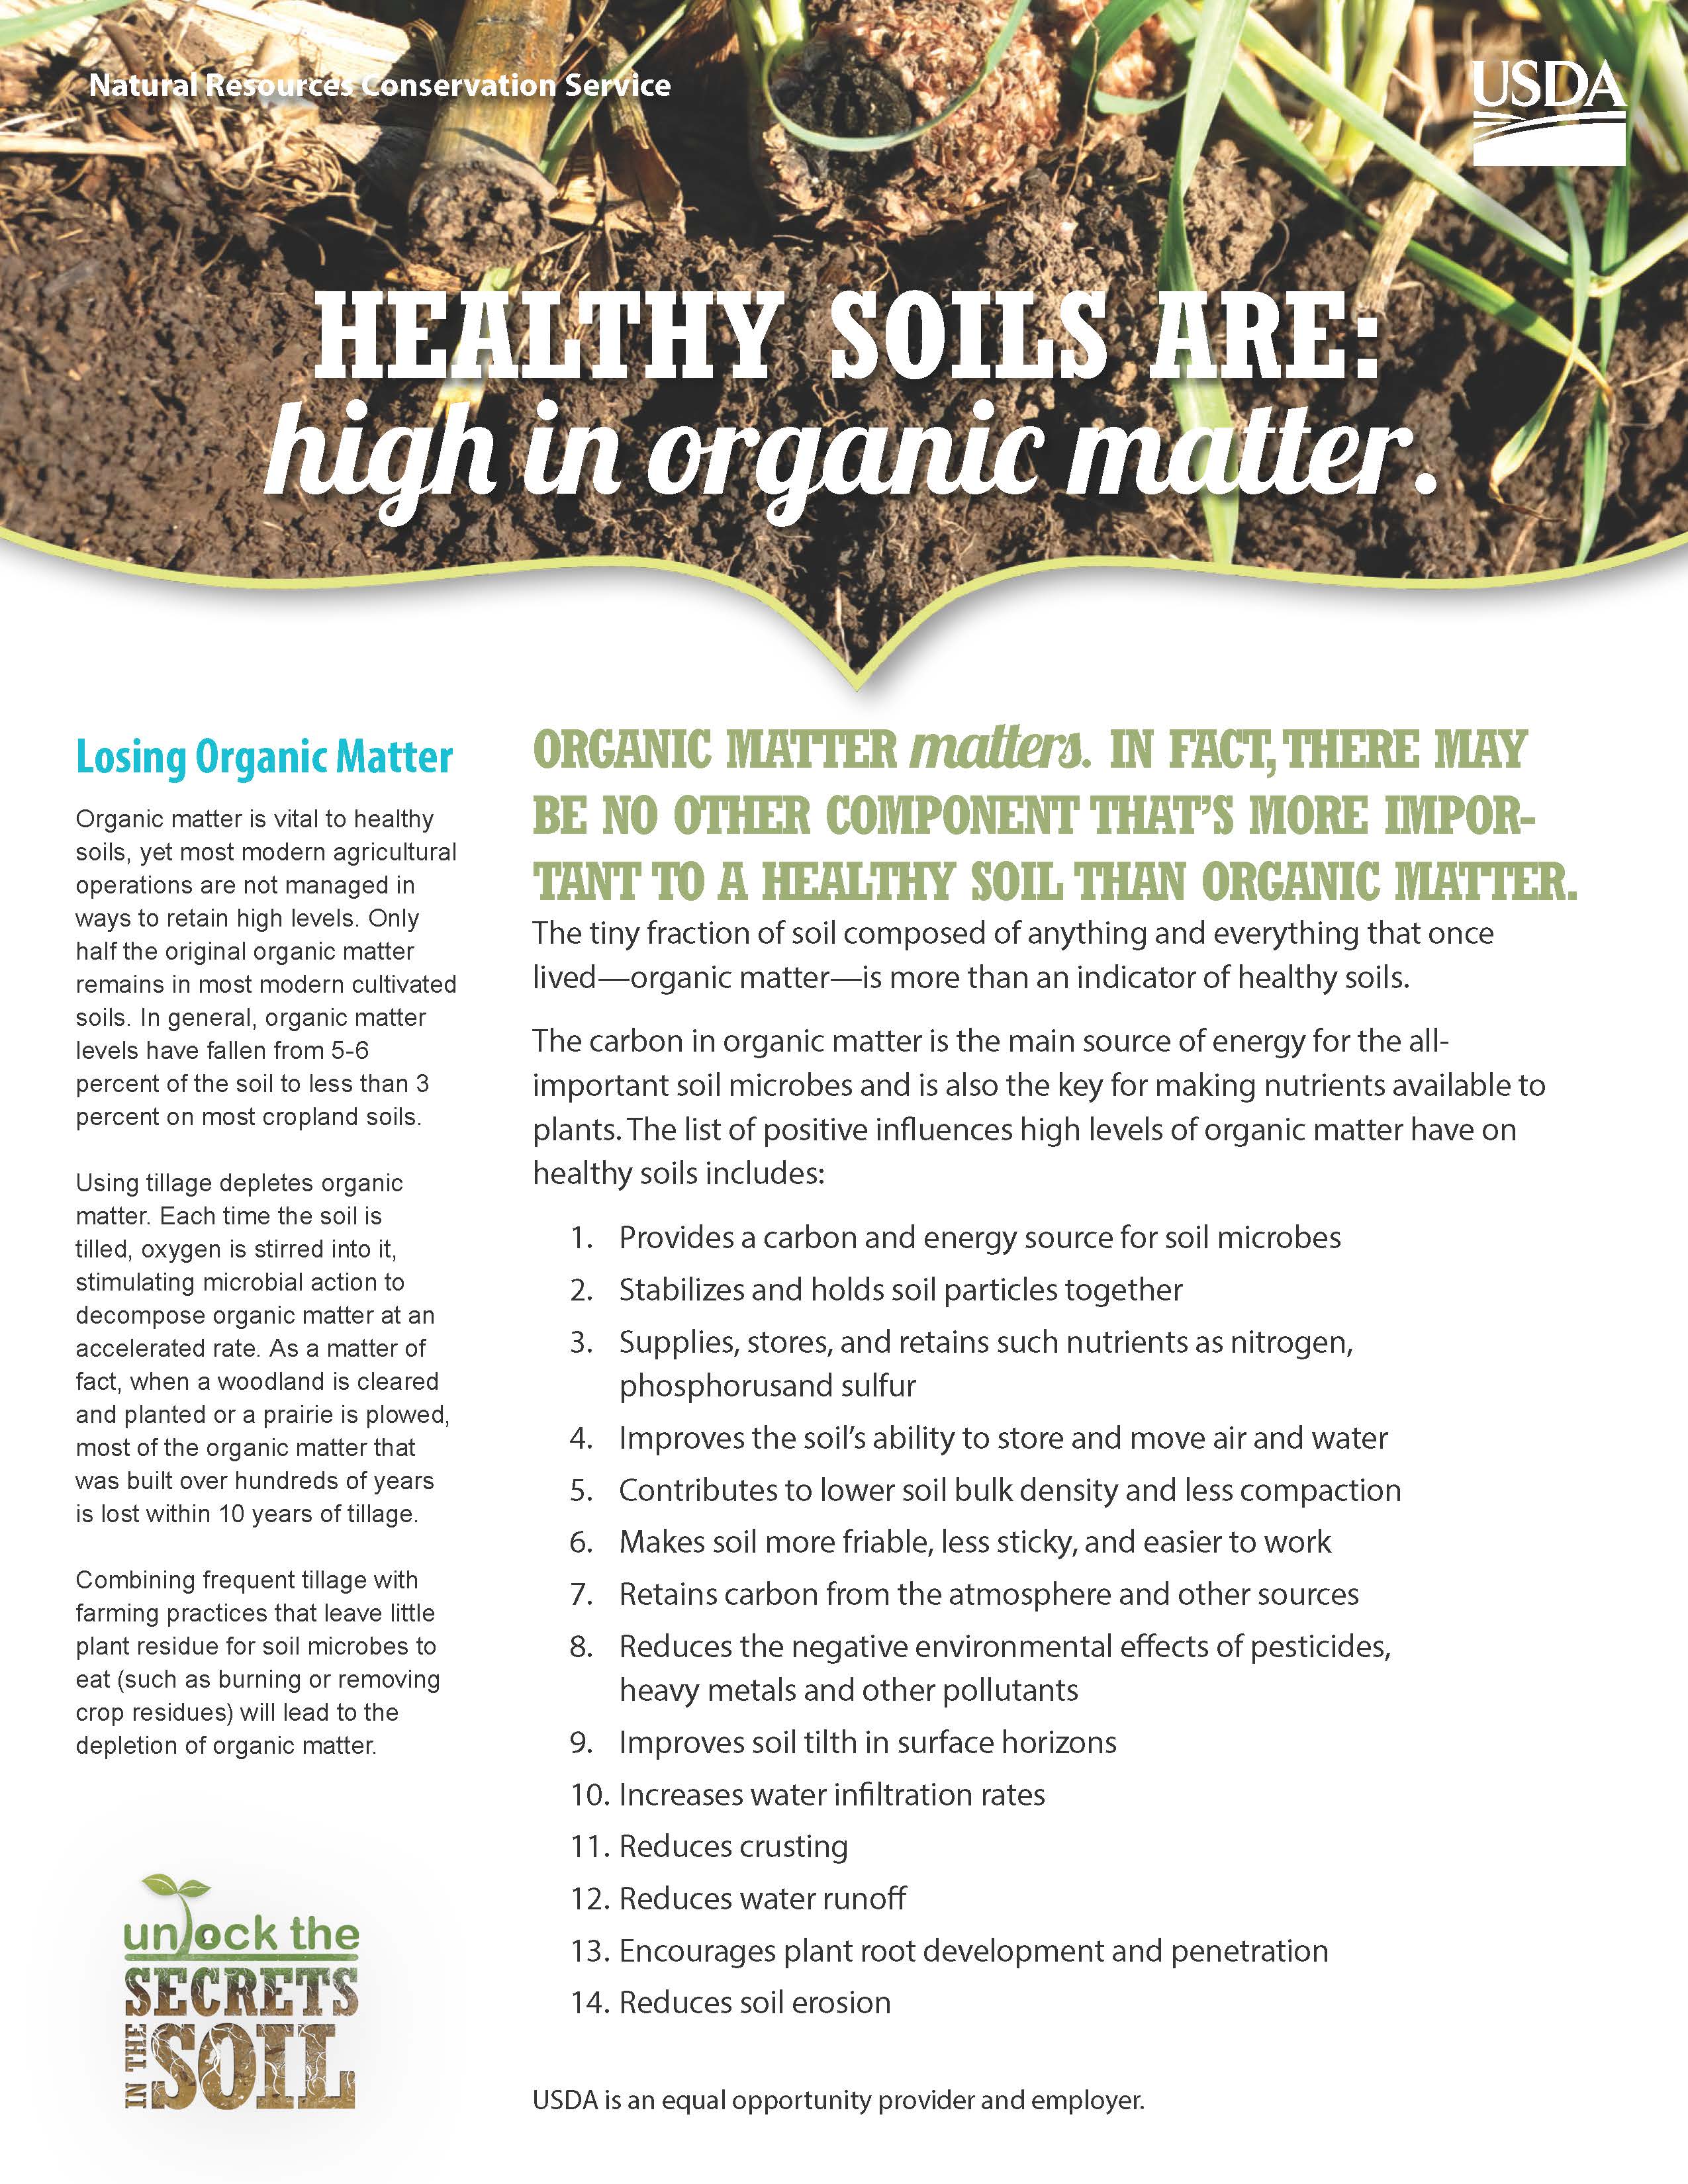 Healthy Soils Are: high in organic matter